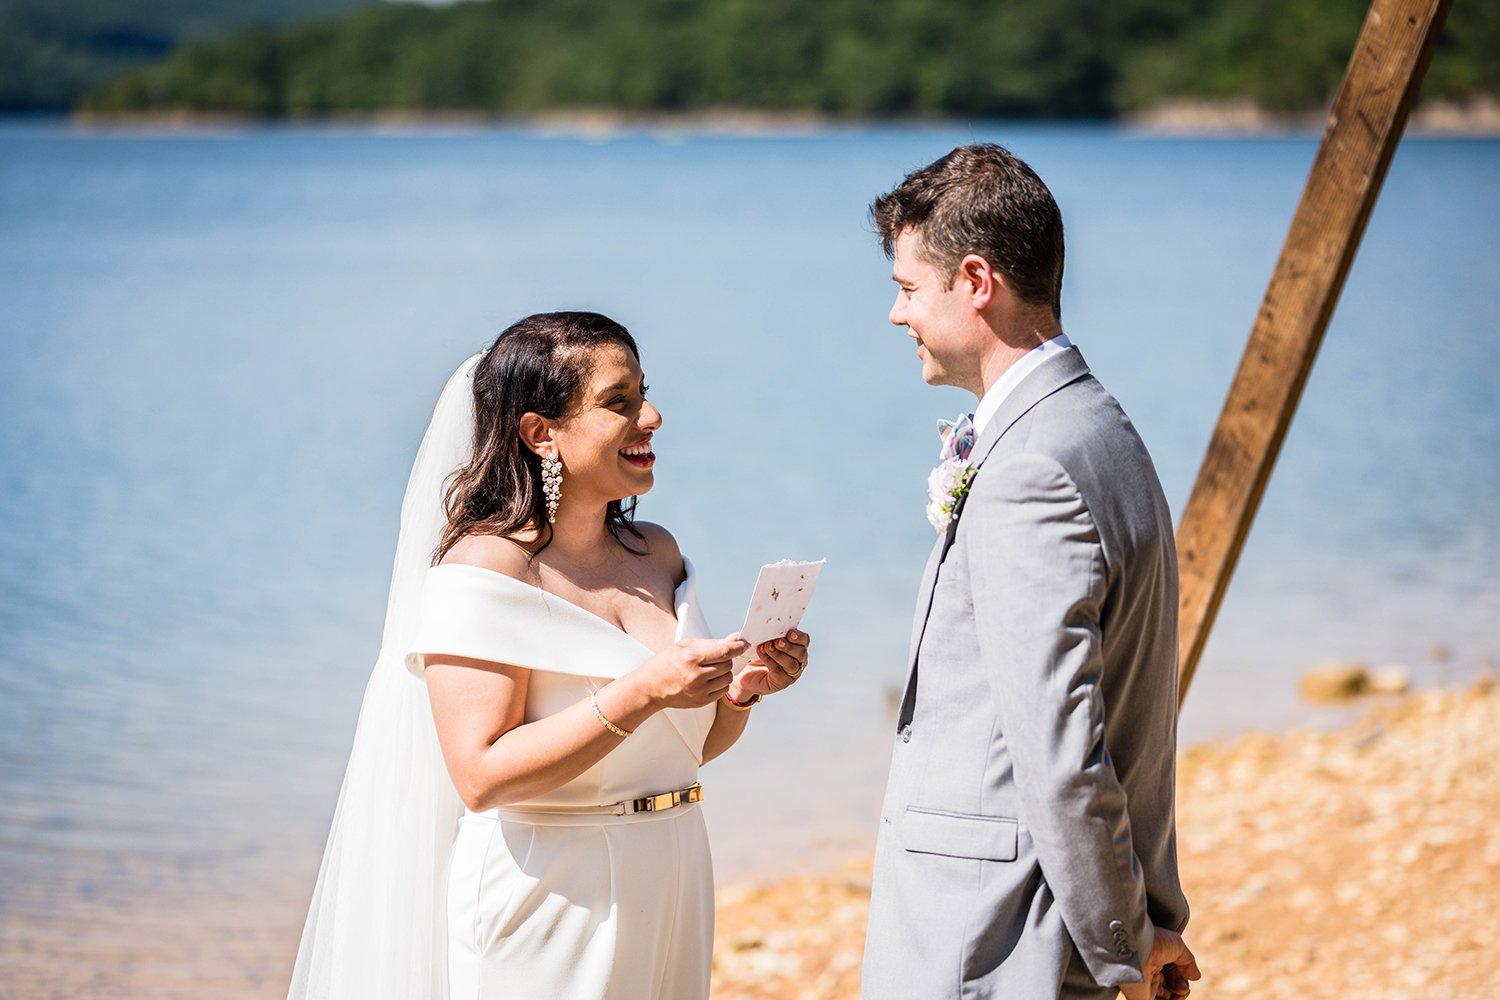 A bride reads her vows along the shoreline of Carvin’s Cove in front of a wooden arch and the groom smiles at her during their elopement.